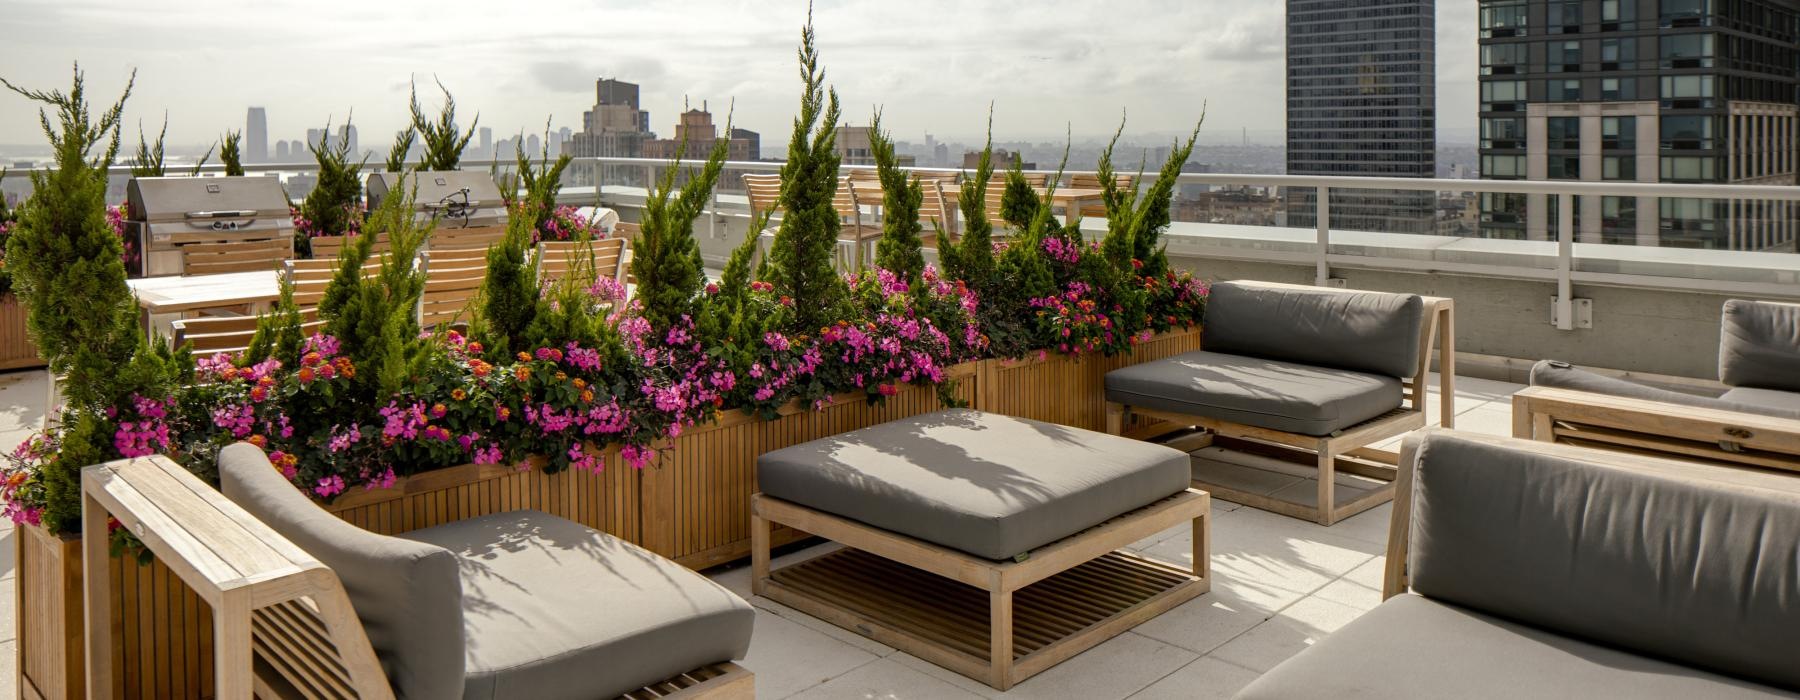 rooftop terrace with tables, chairs and planters